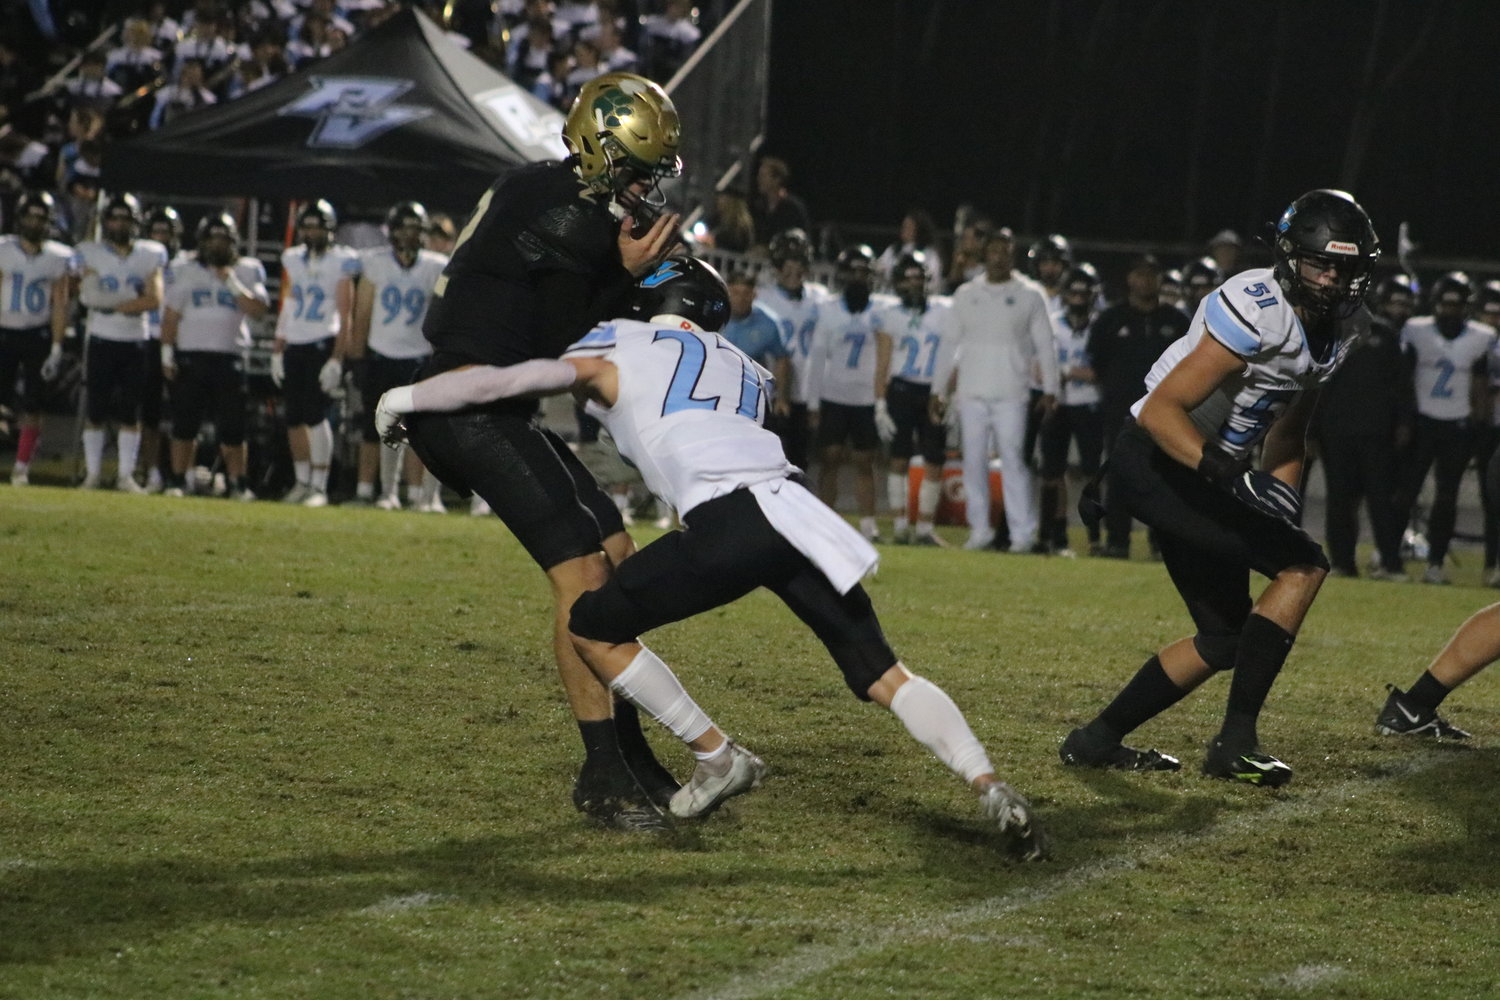 Ponte Vedra’s James Richardson hits Marcus Stokes of Nease in the backfield.